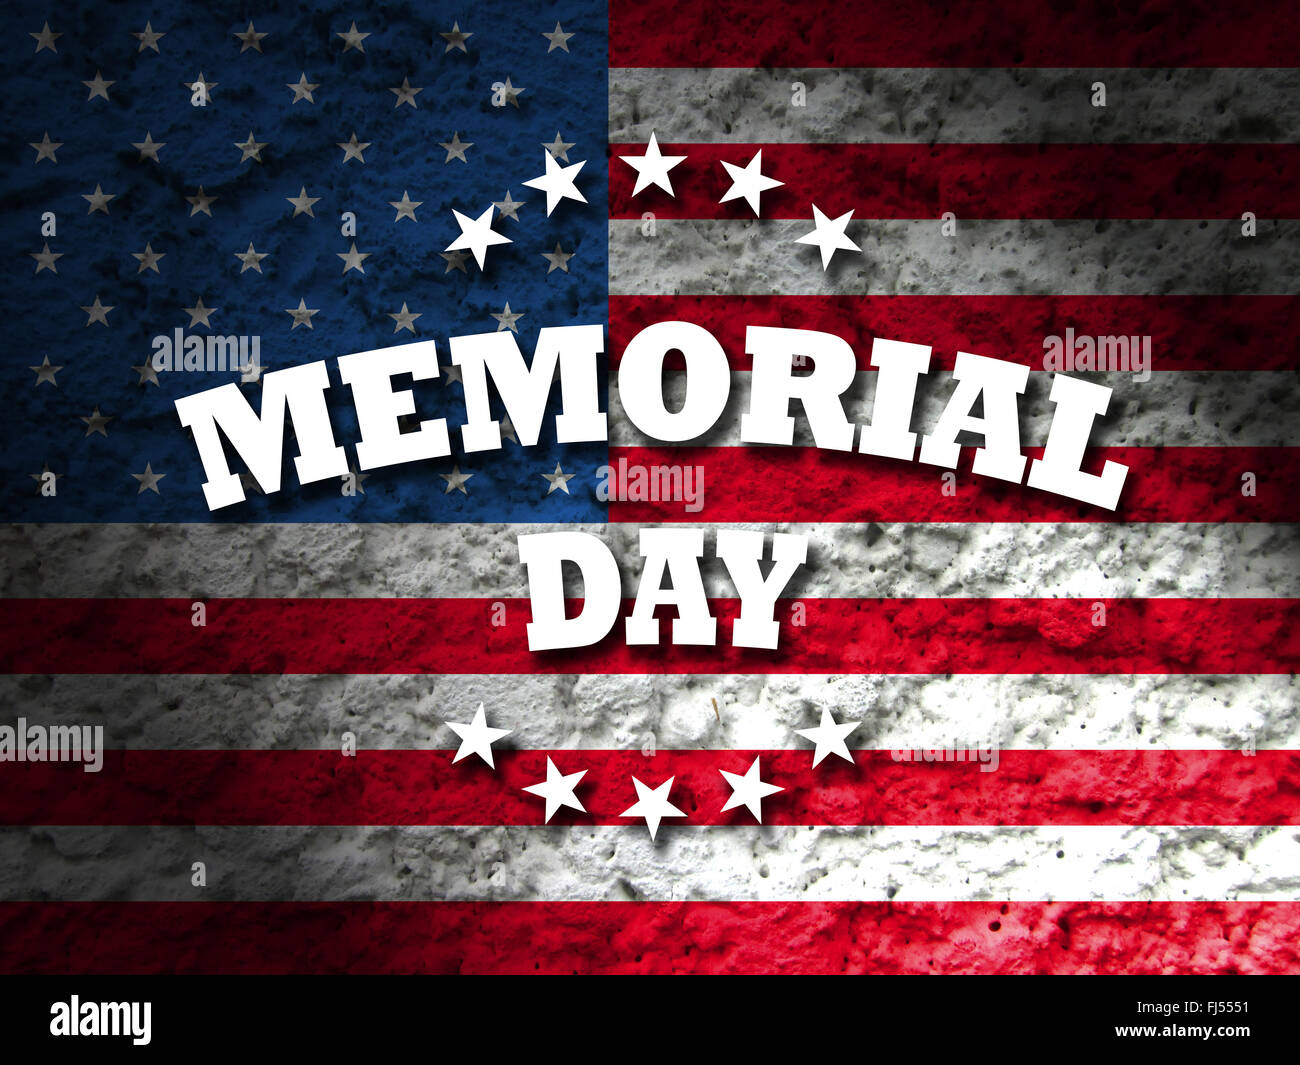 Us Memorial Day Card With American Flag Grunge Style Background Stock Photo Alamy,White Russian Drink Ingredients